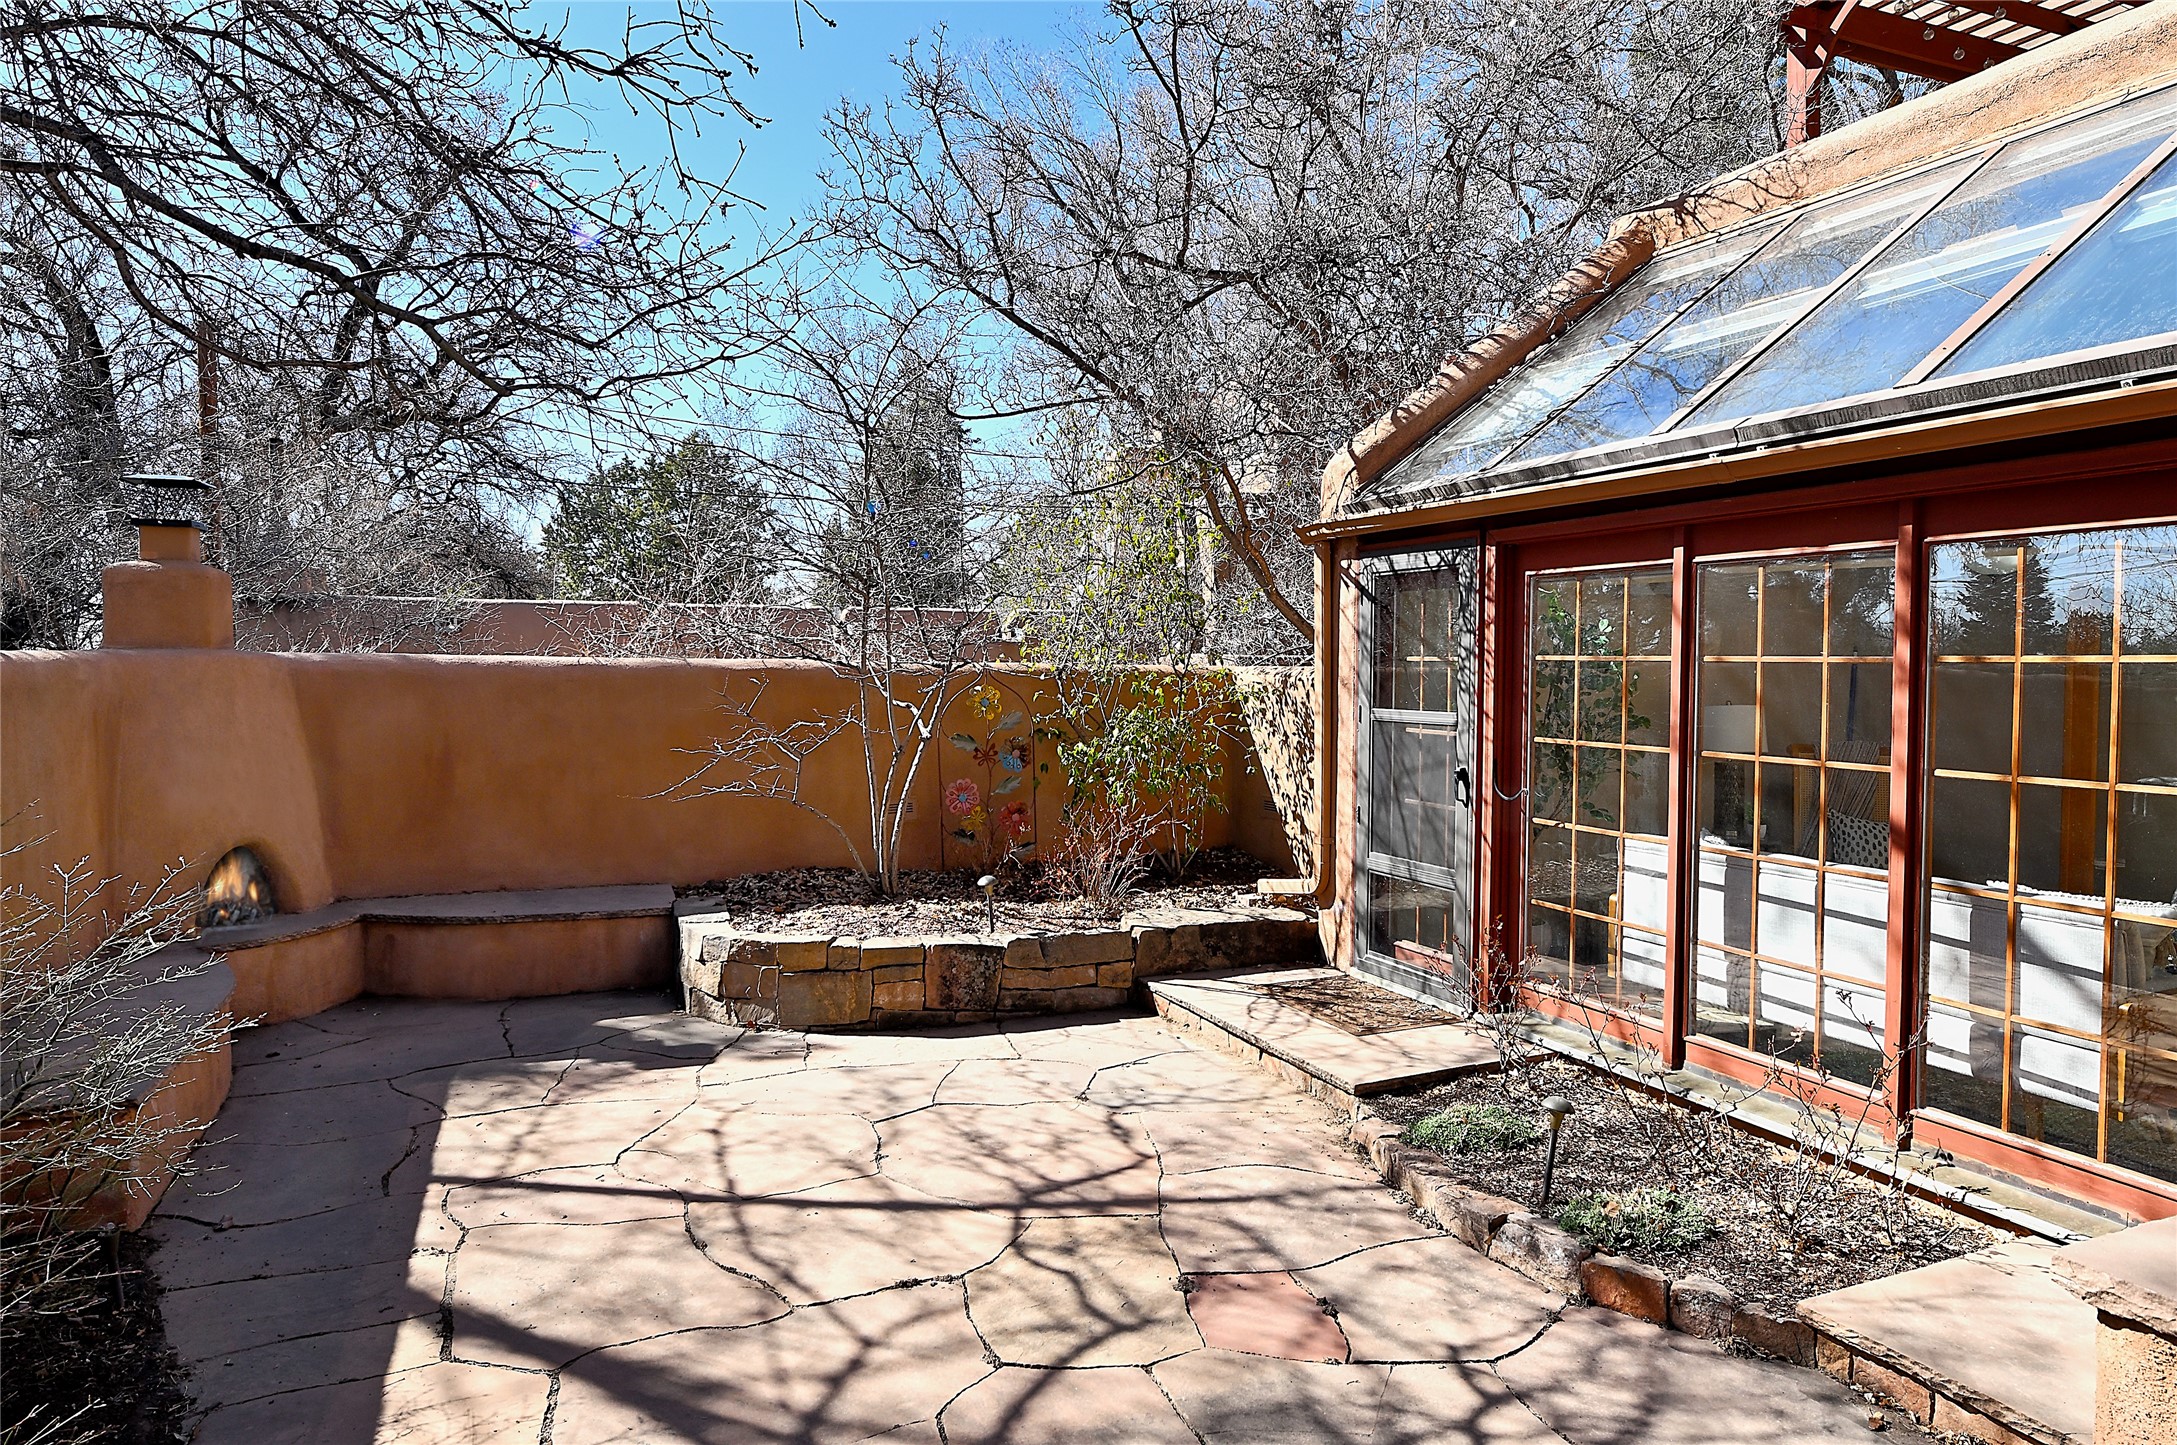 707 Palace 1, Santa Fe, New Mexico 87501, 3 Bedrooms Bedrooms, ,3 BathroomsBathrooms,Residential,For Sale,707 Palace 1,202234500